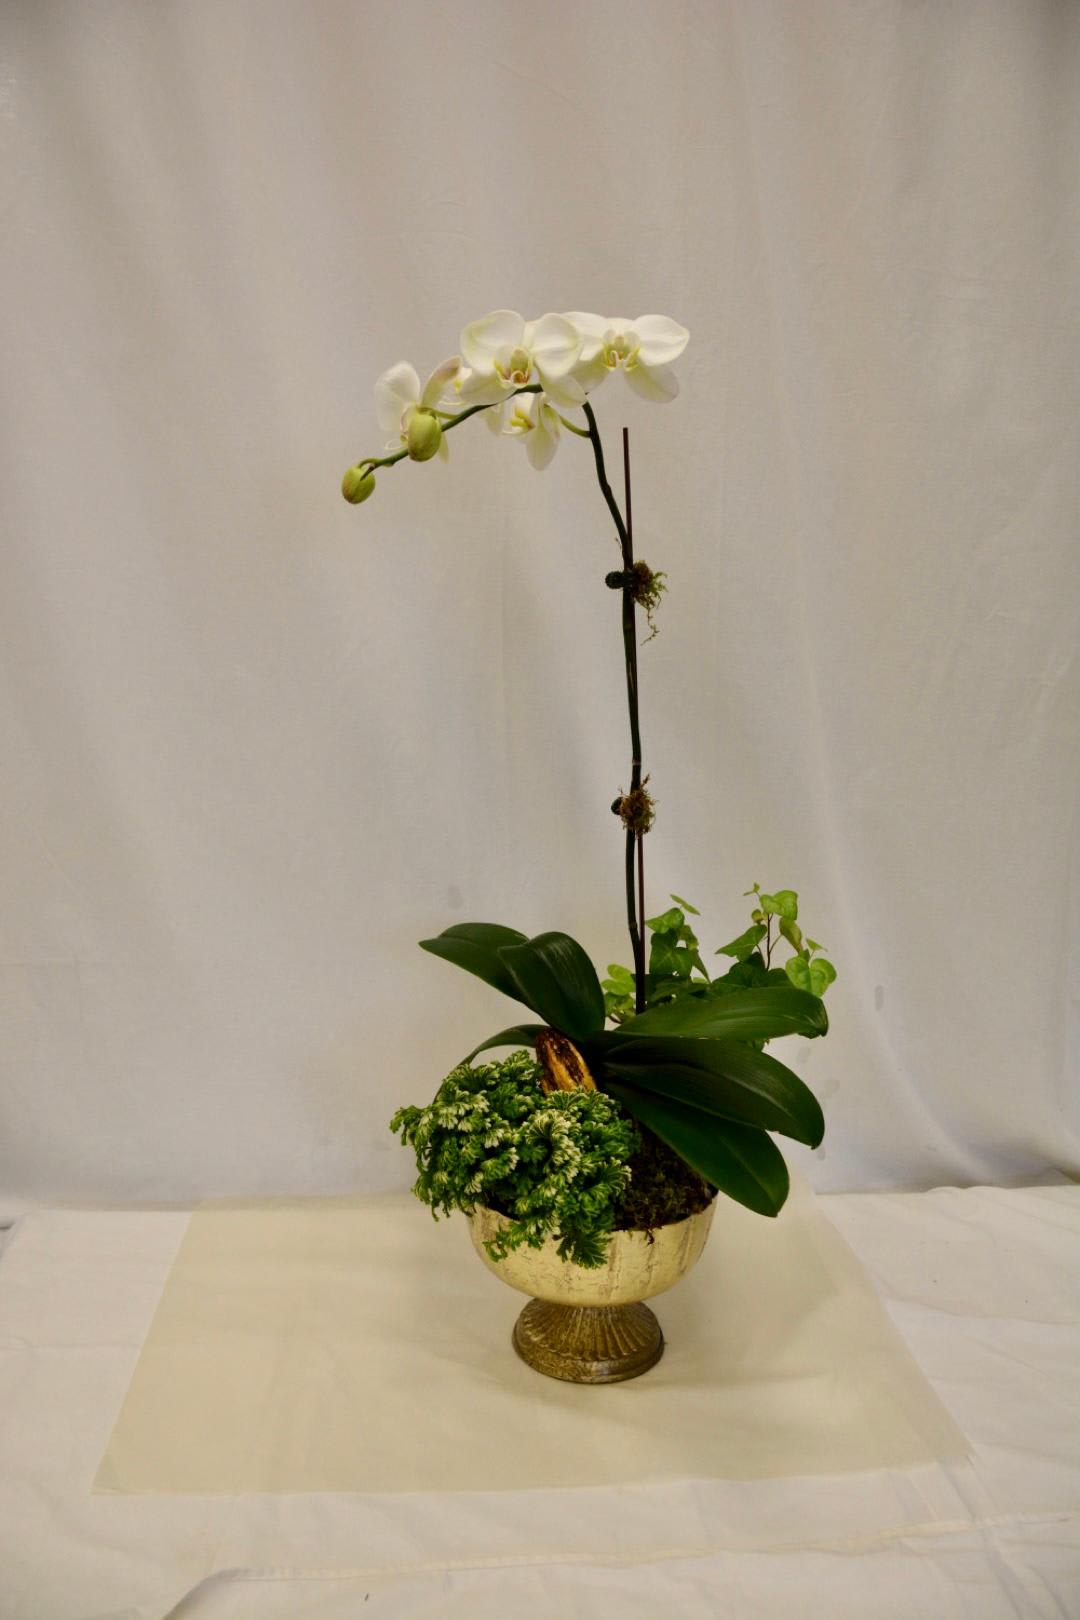 Orchid Dream - White orchid nestled in frosty fern ind ivy set in moss filled gold pedastal. 